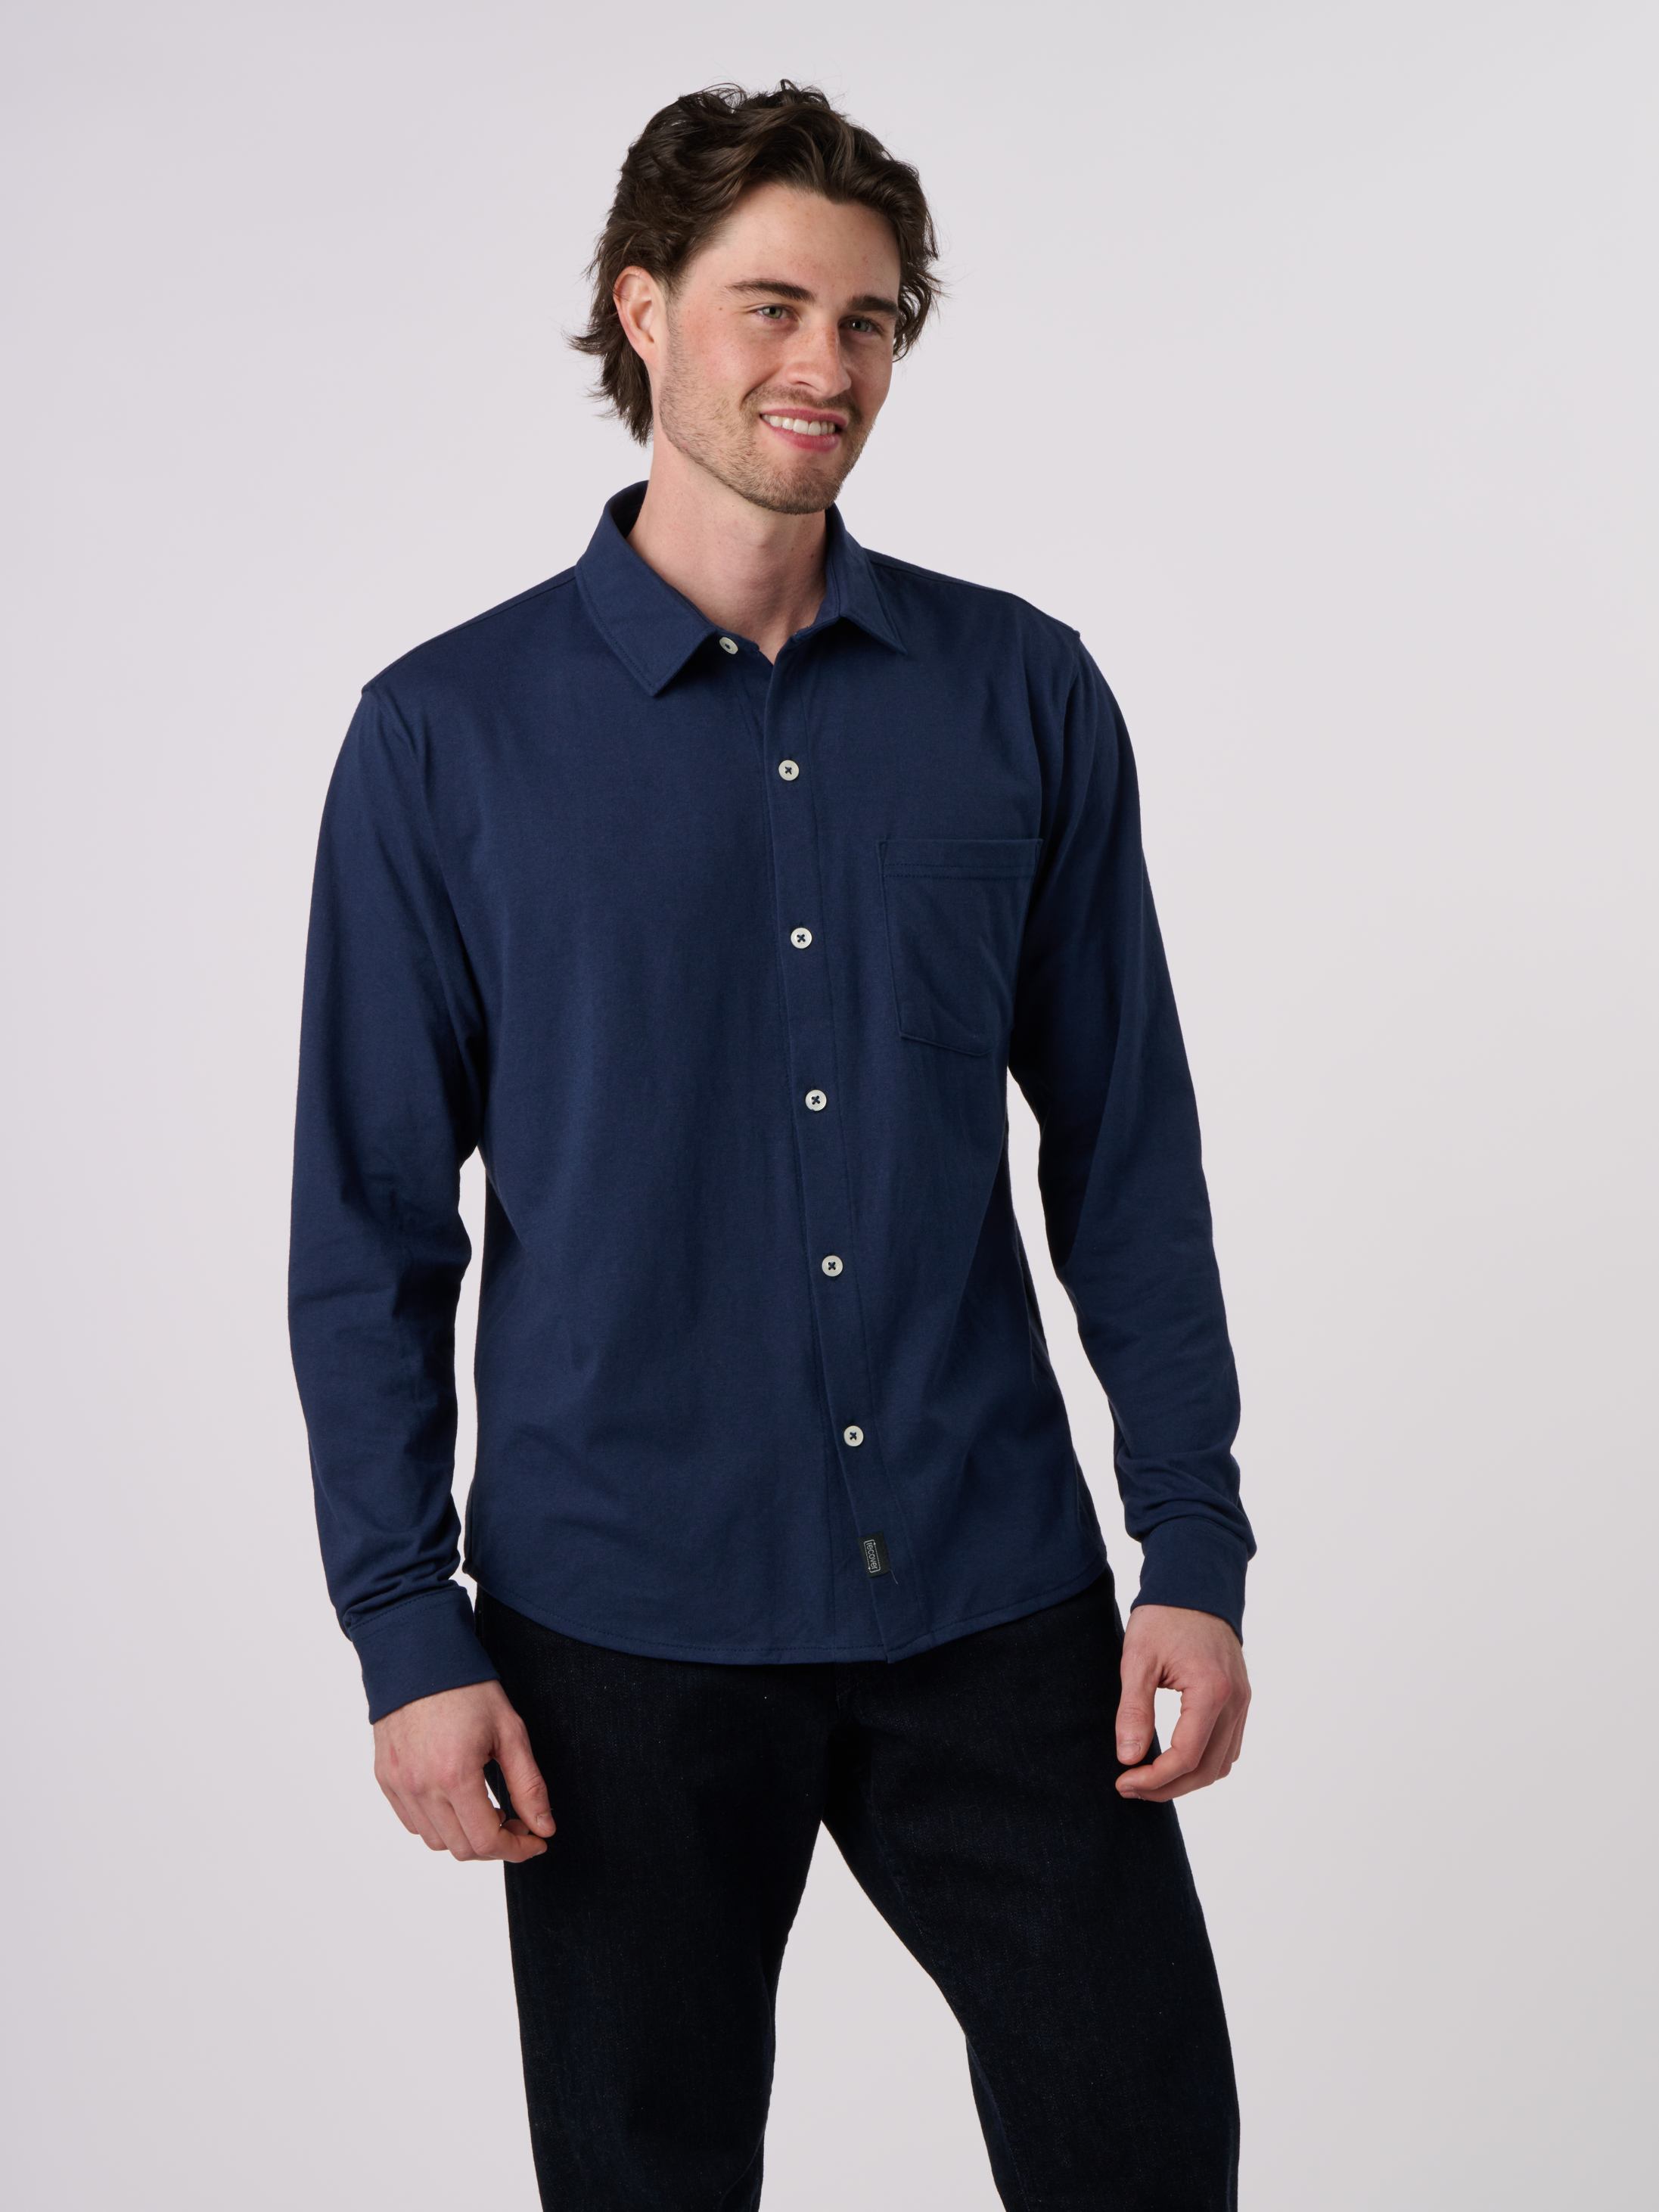 RECOVER_EC650_ECOBUTTONDOWN_NAVY_FRONT.png